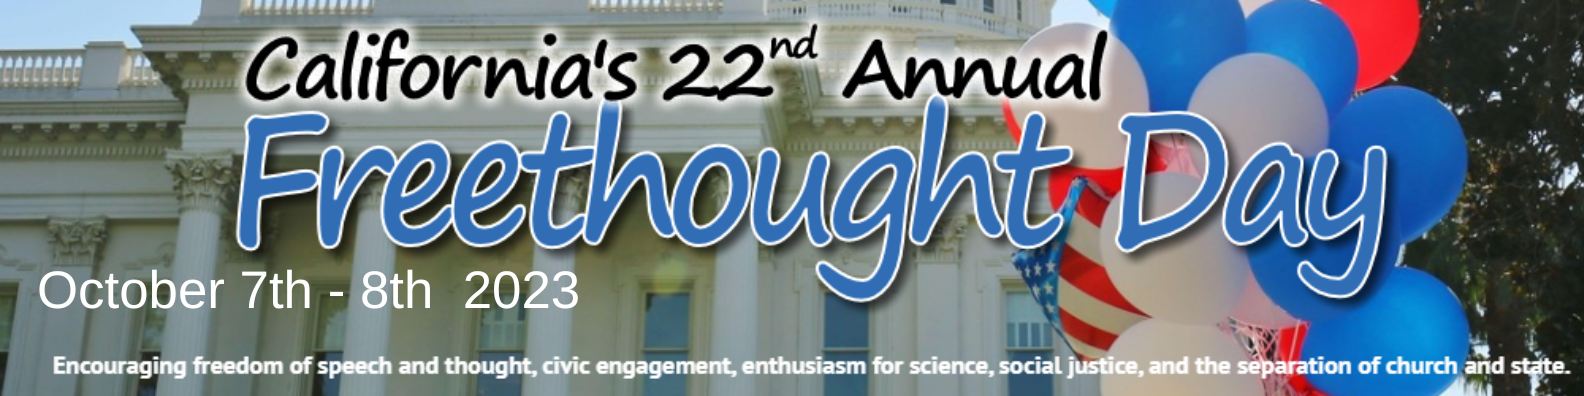 California Freethought Day October 7th - 8th